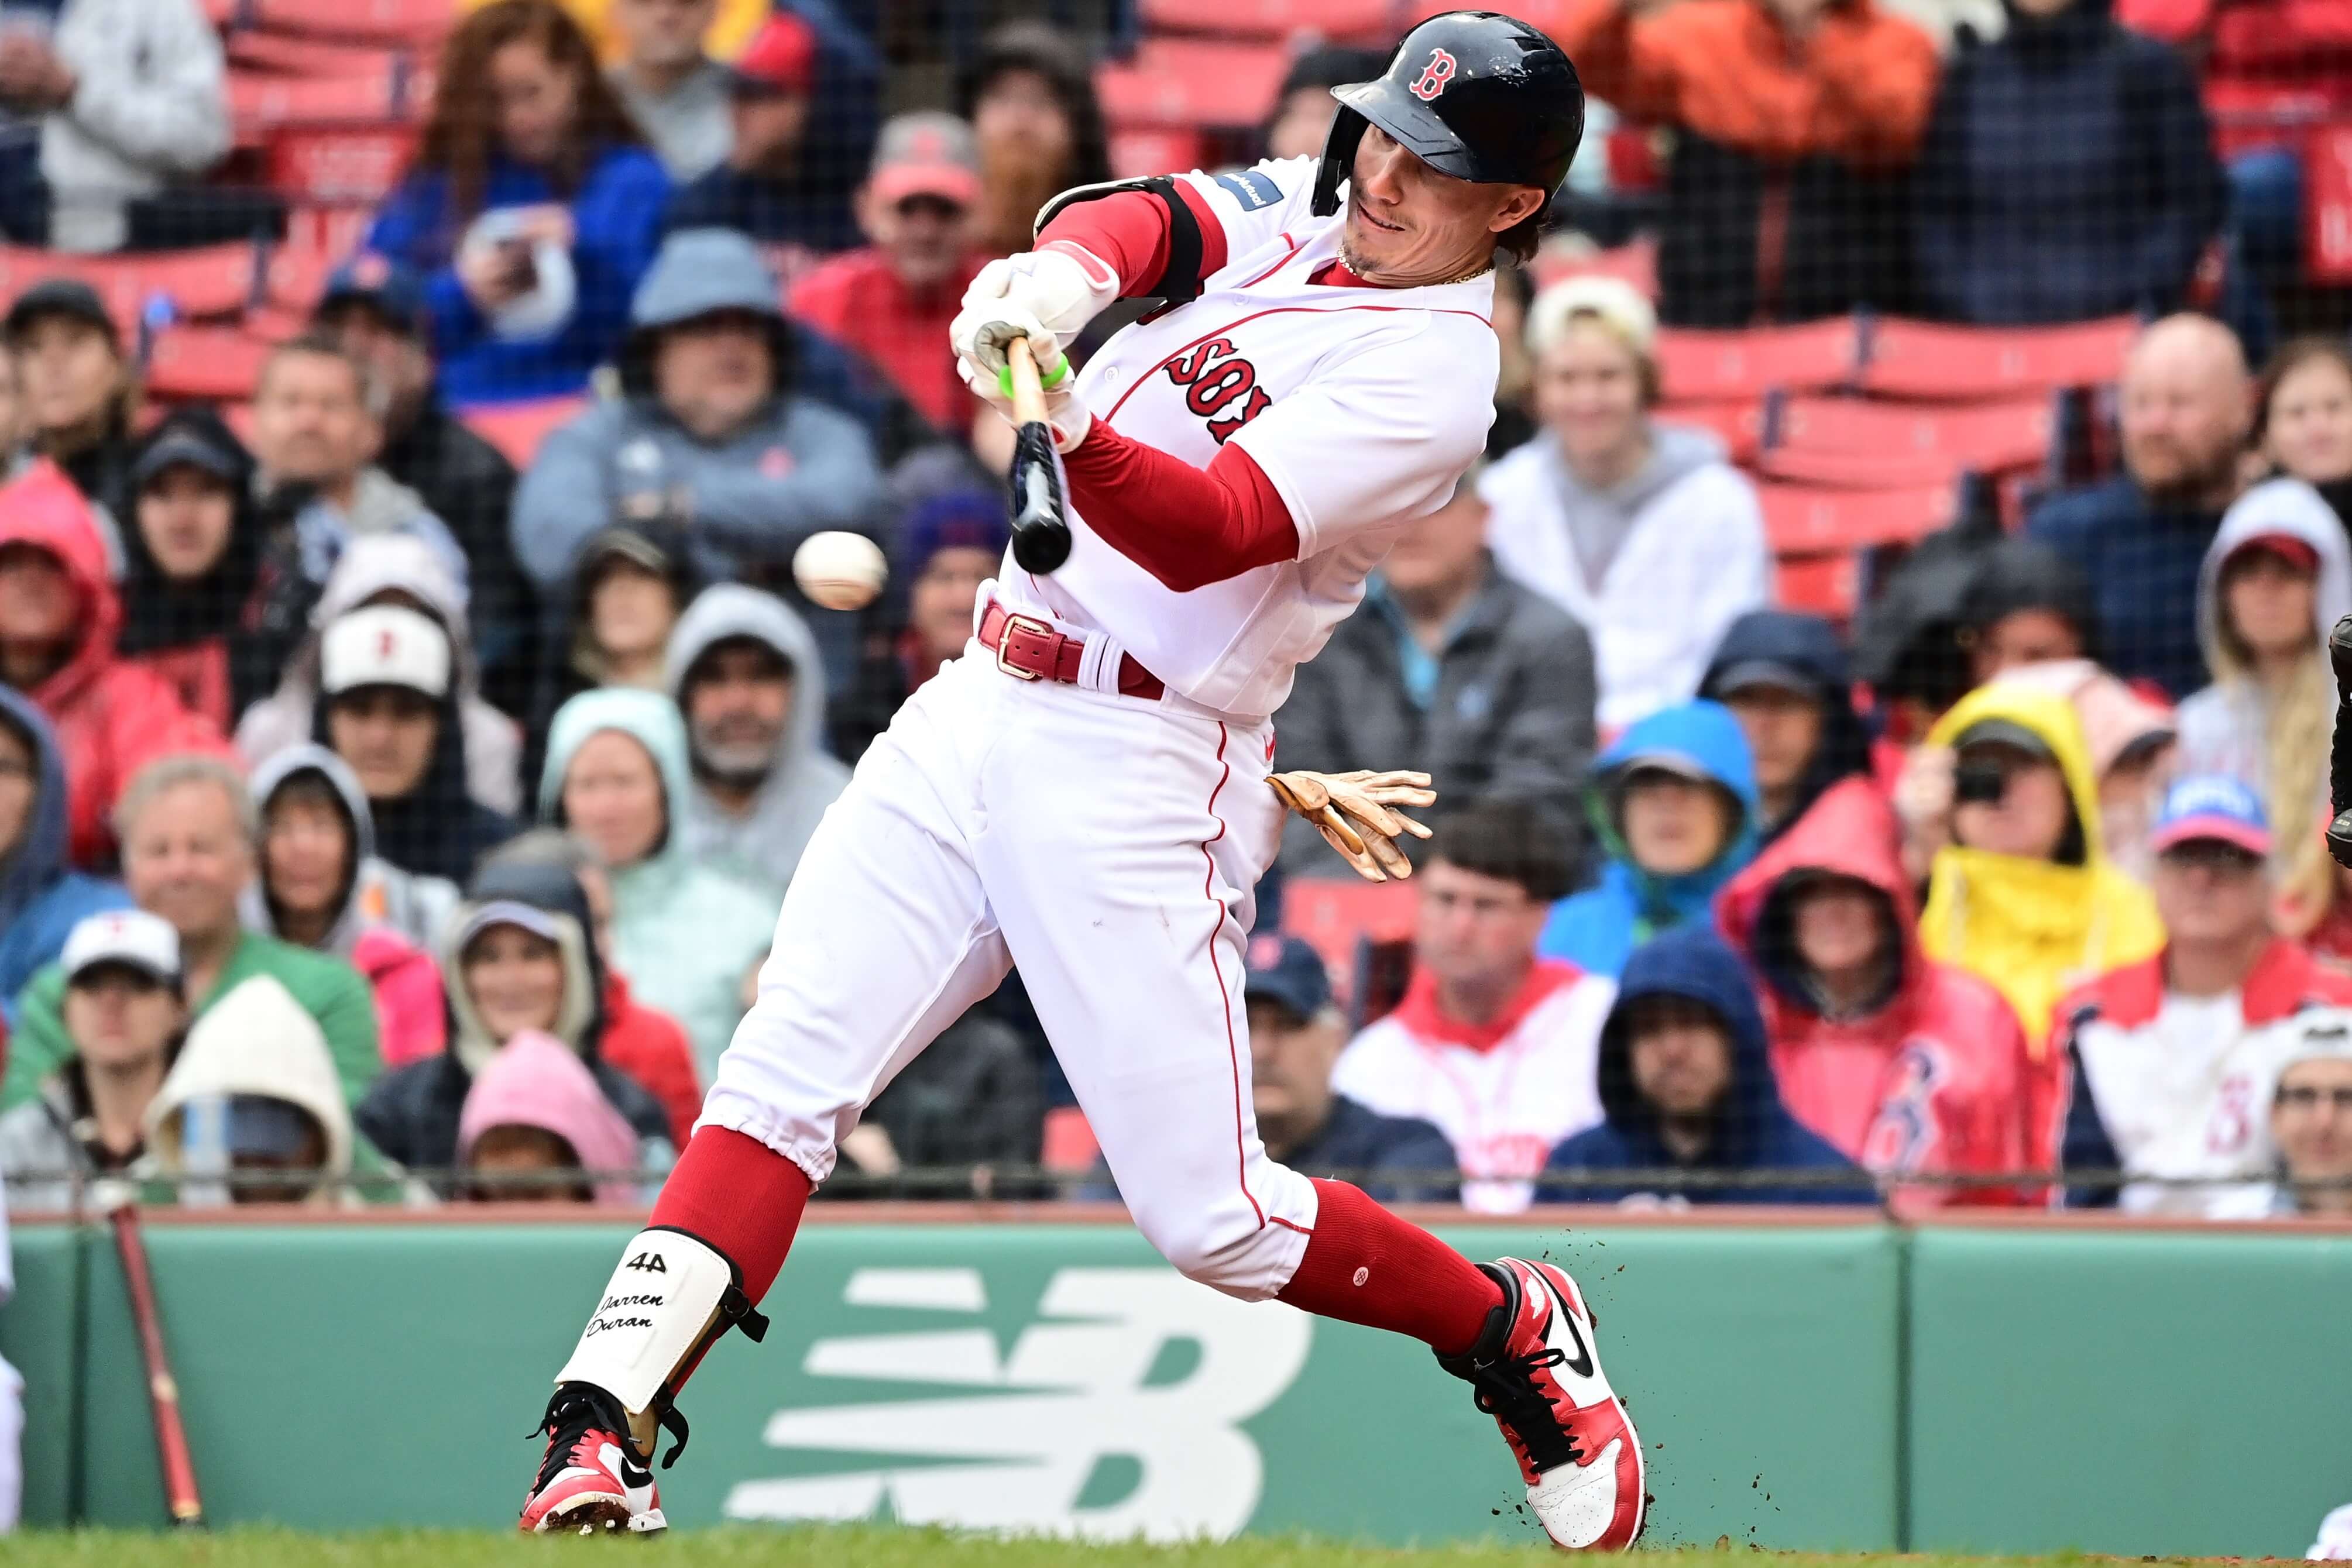 Red Sox Futures: Take Advantage of Newly Legal Massachusetts MLB Betting